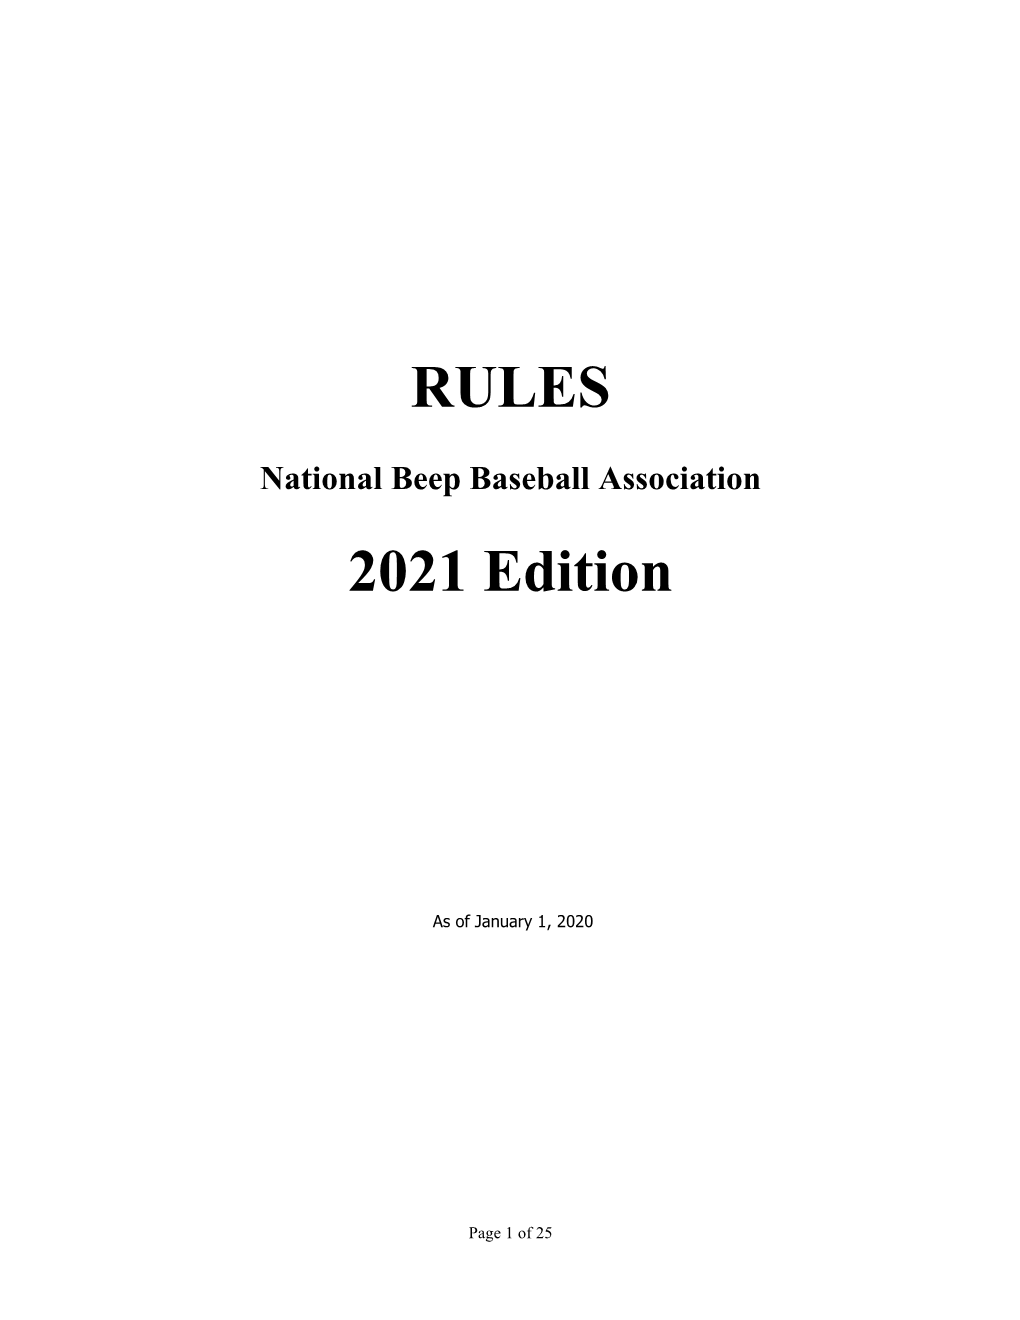 NBBA Rule Book, 2021 Edition in .Pdf Format